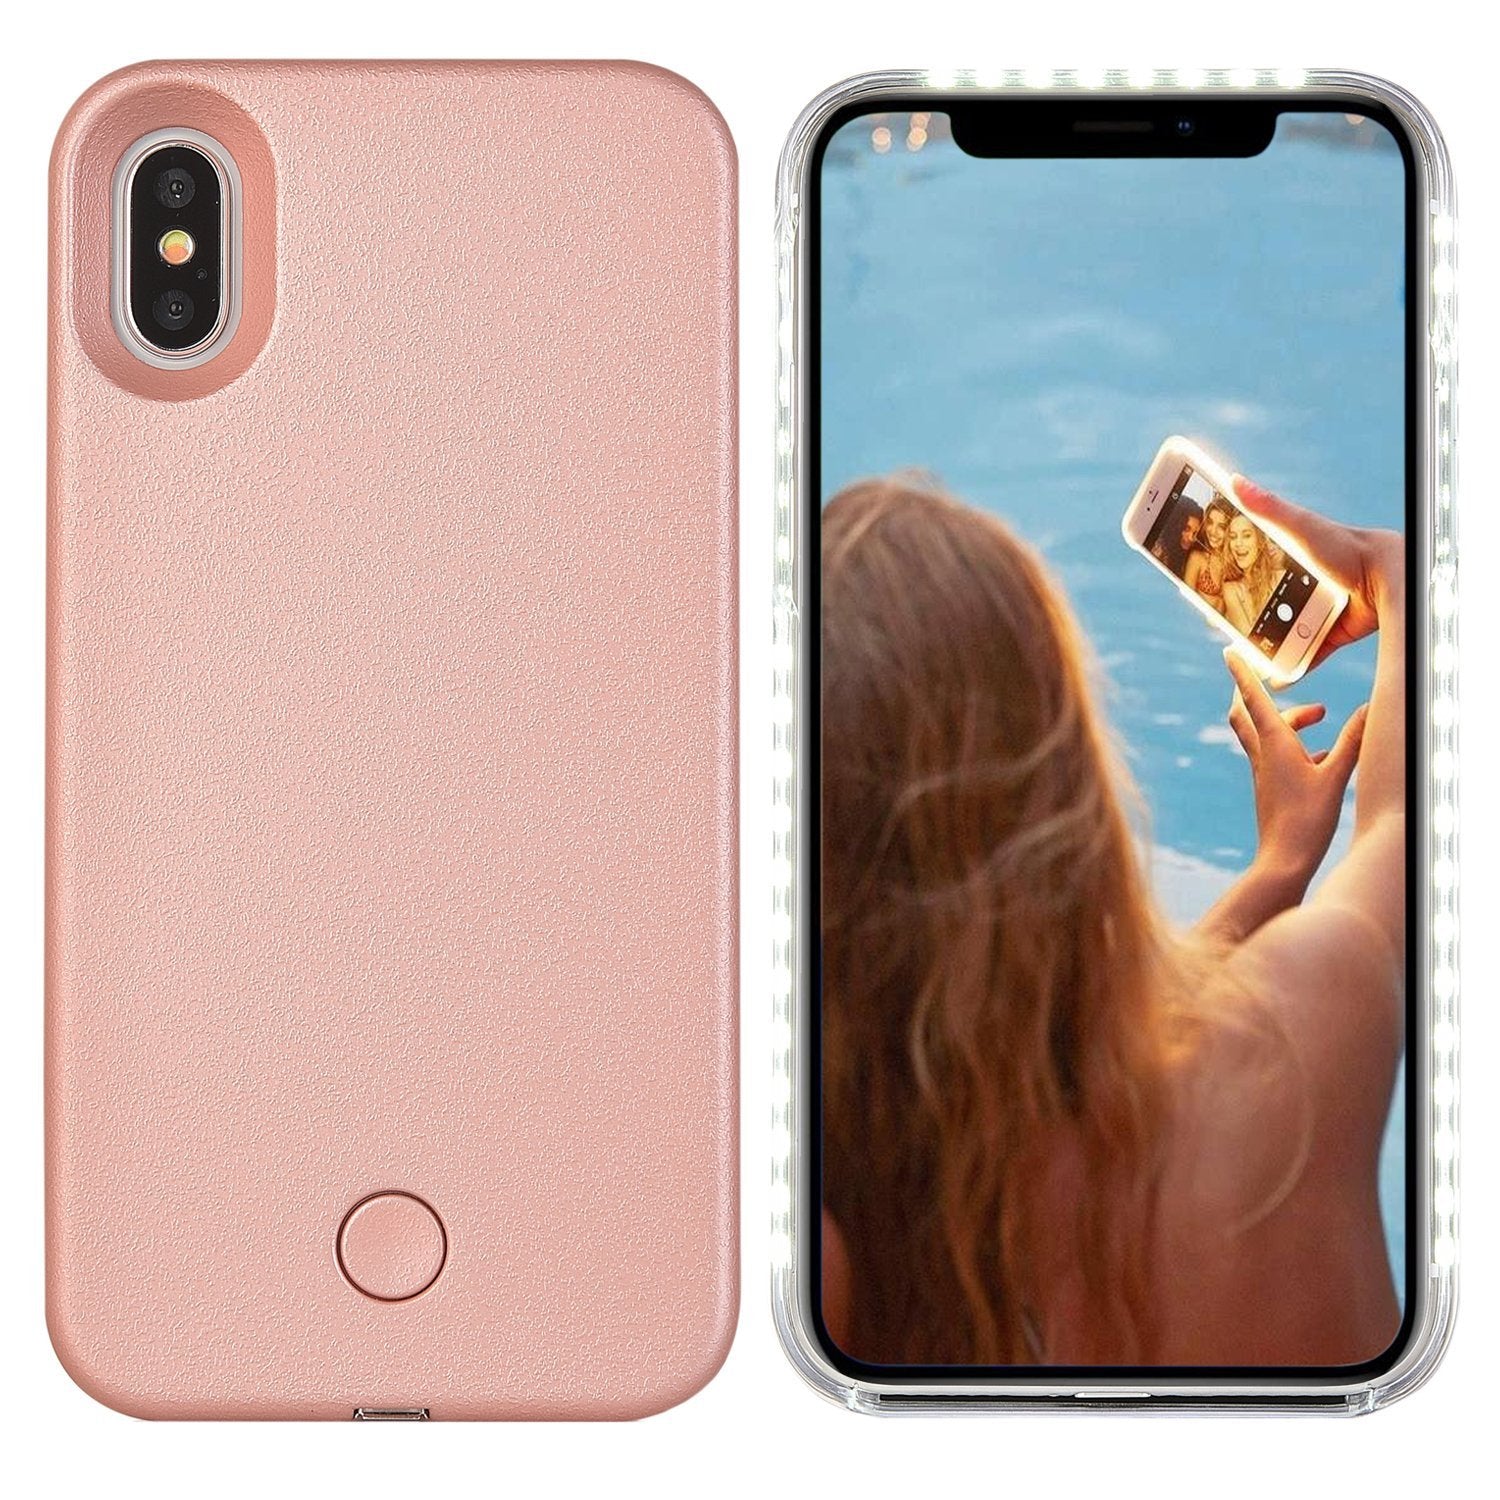 iPhone XS / X Case, LED Illuminated Selfie Light Cell Phone Case Cover [Rechargeable] Light Up Luminous Selfie Flashlight Case 5.8inch - Rose Gold